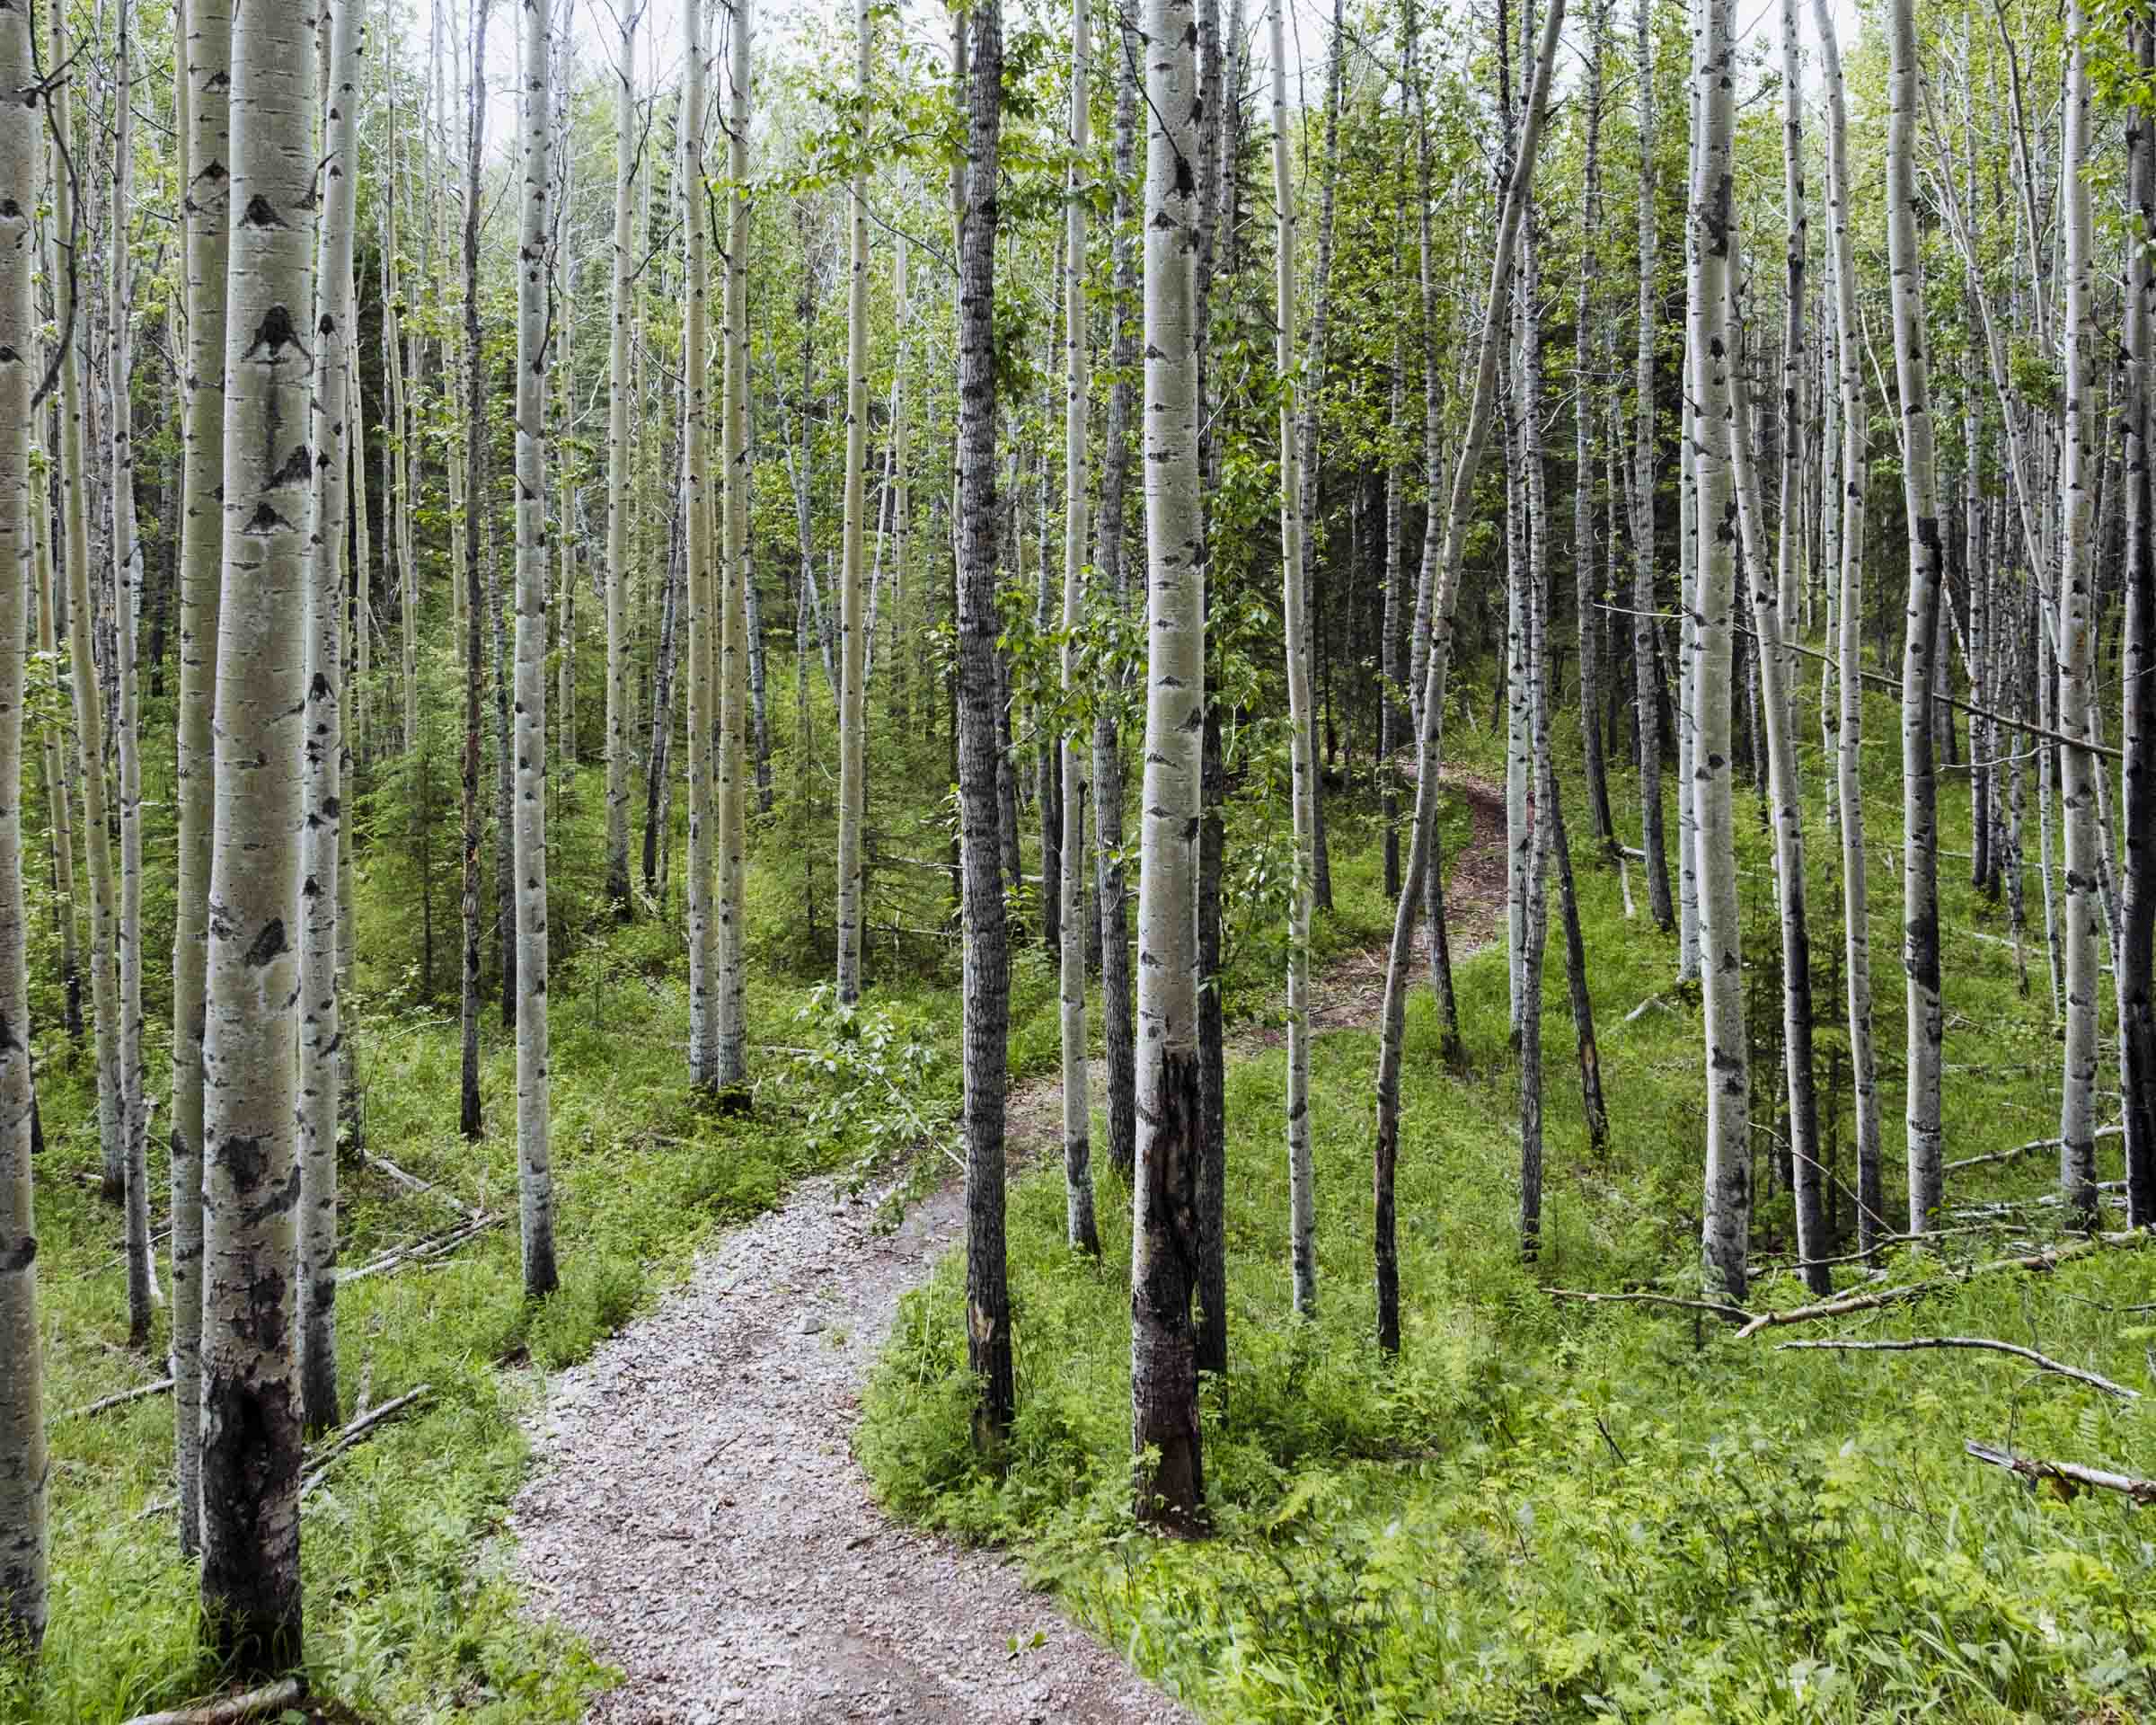 Hiking through aspen forests